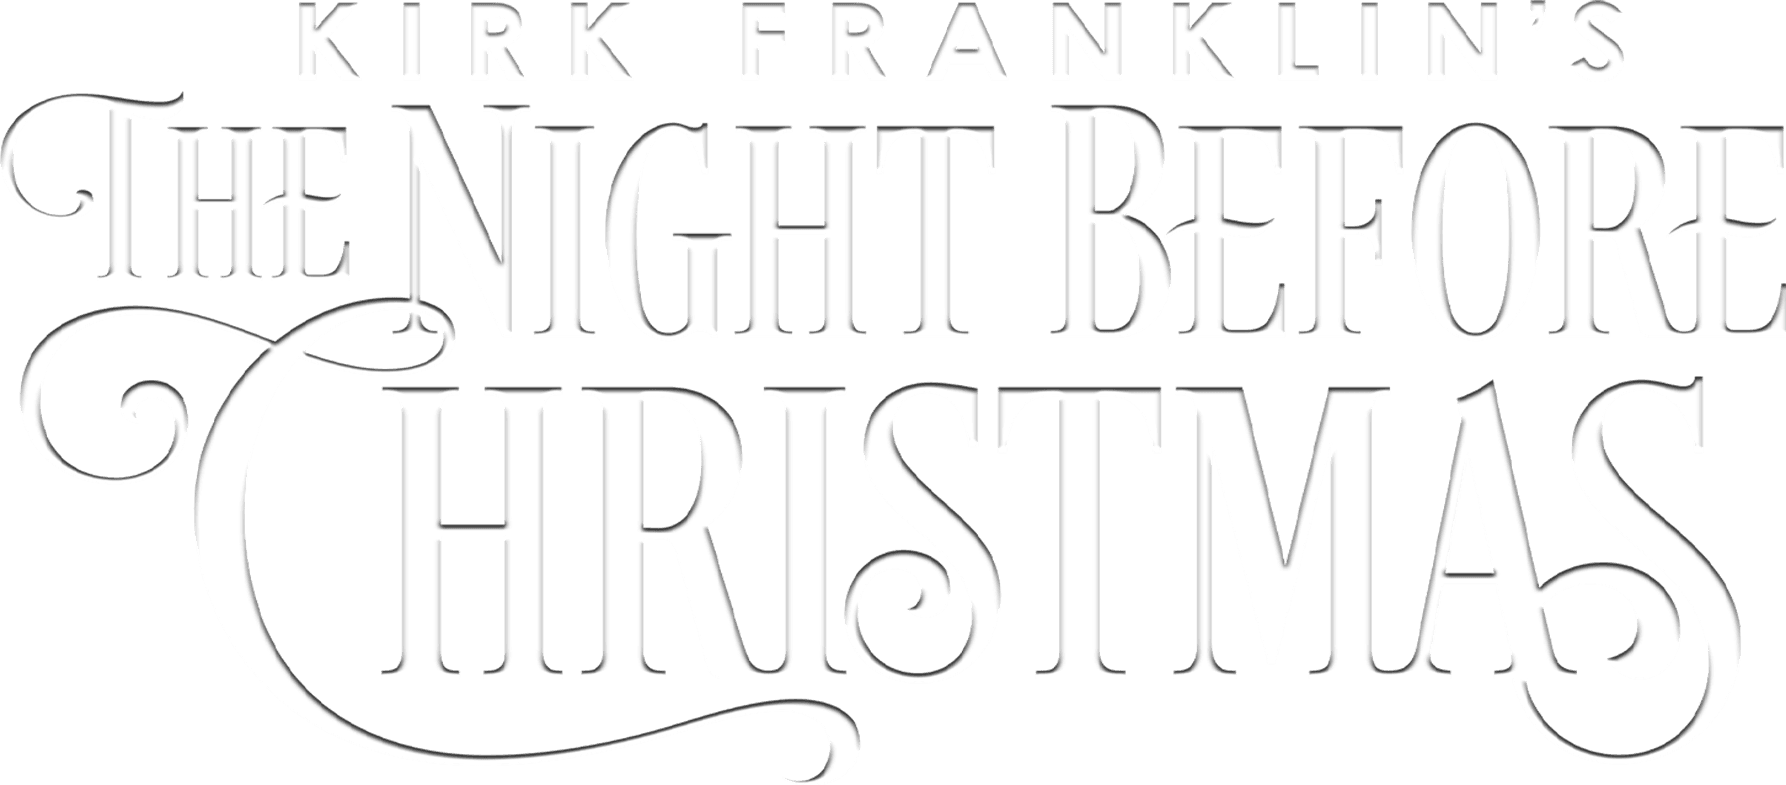 Kirk Franklin's The Night Before Christmas logo